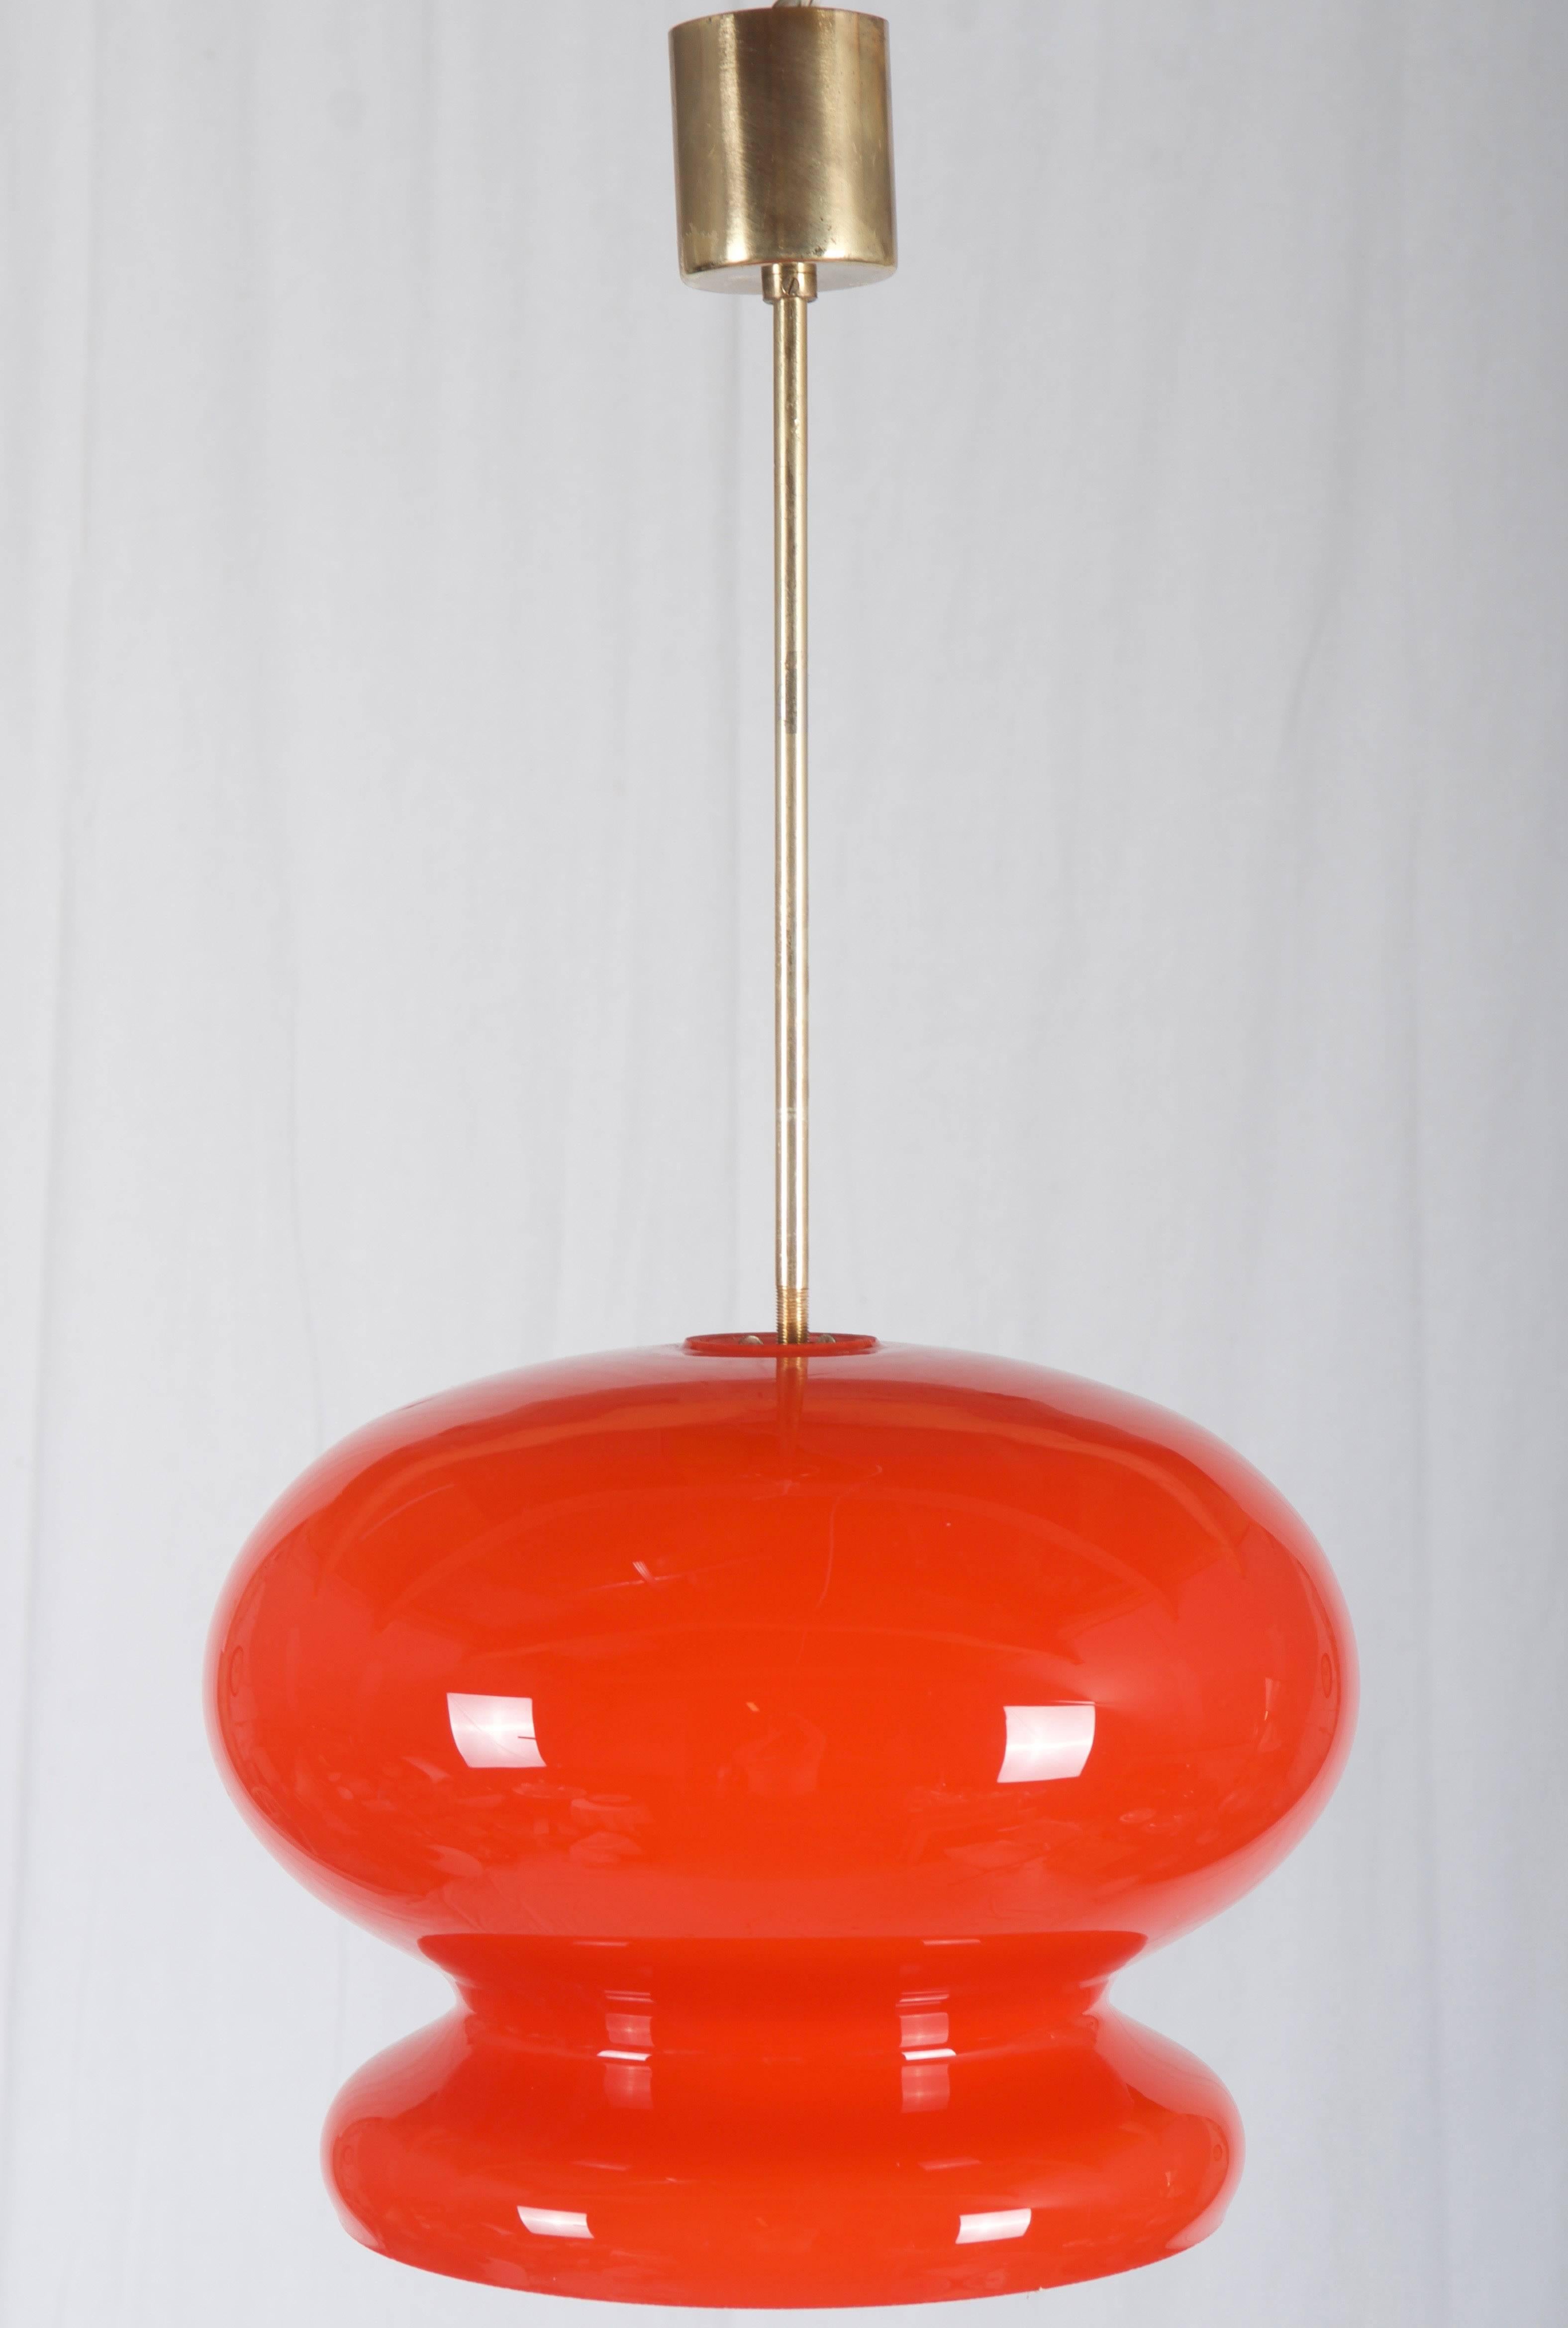 Double layered glass opaline and amber. Made in the 1960s in Czechoslovakia.